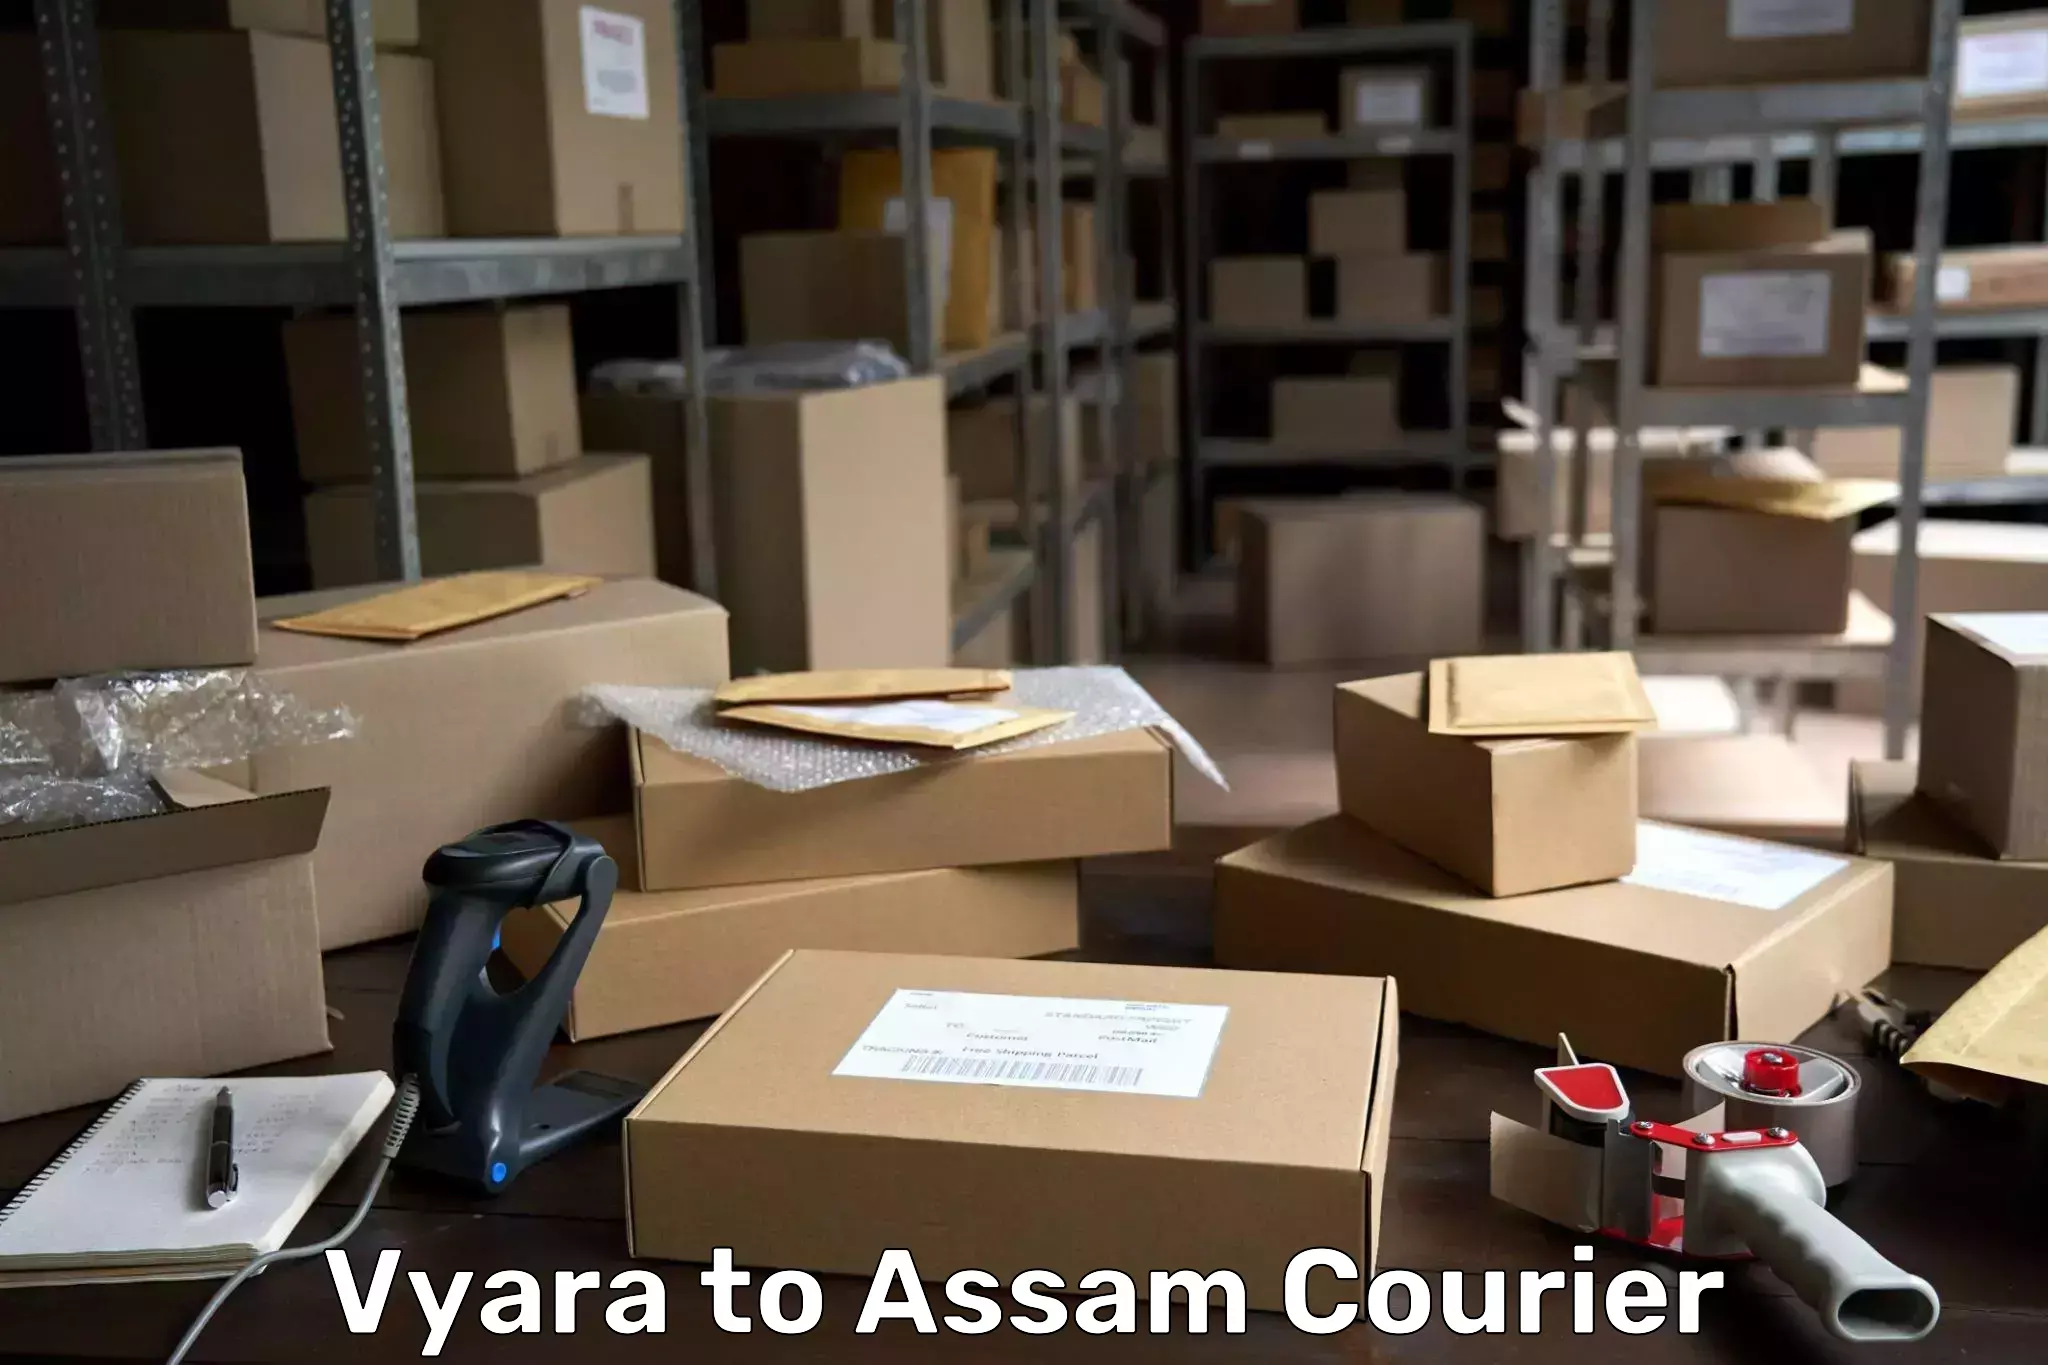 Weekend courier service Vyara to Lala Assam